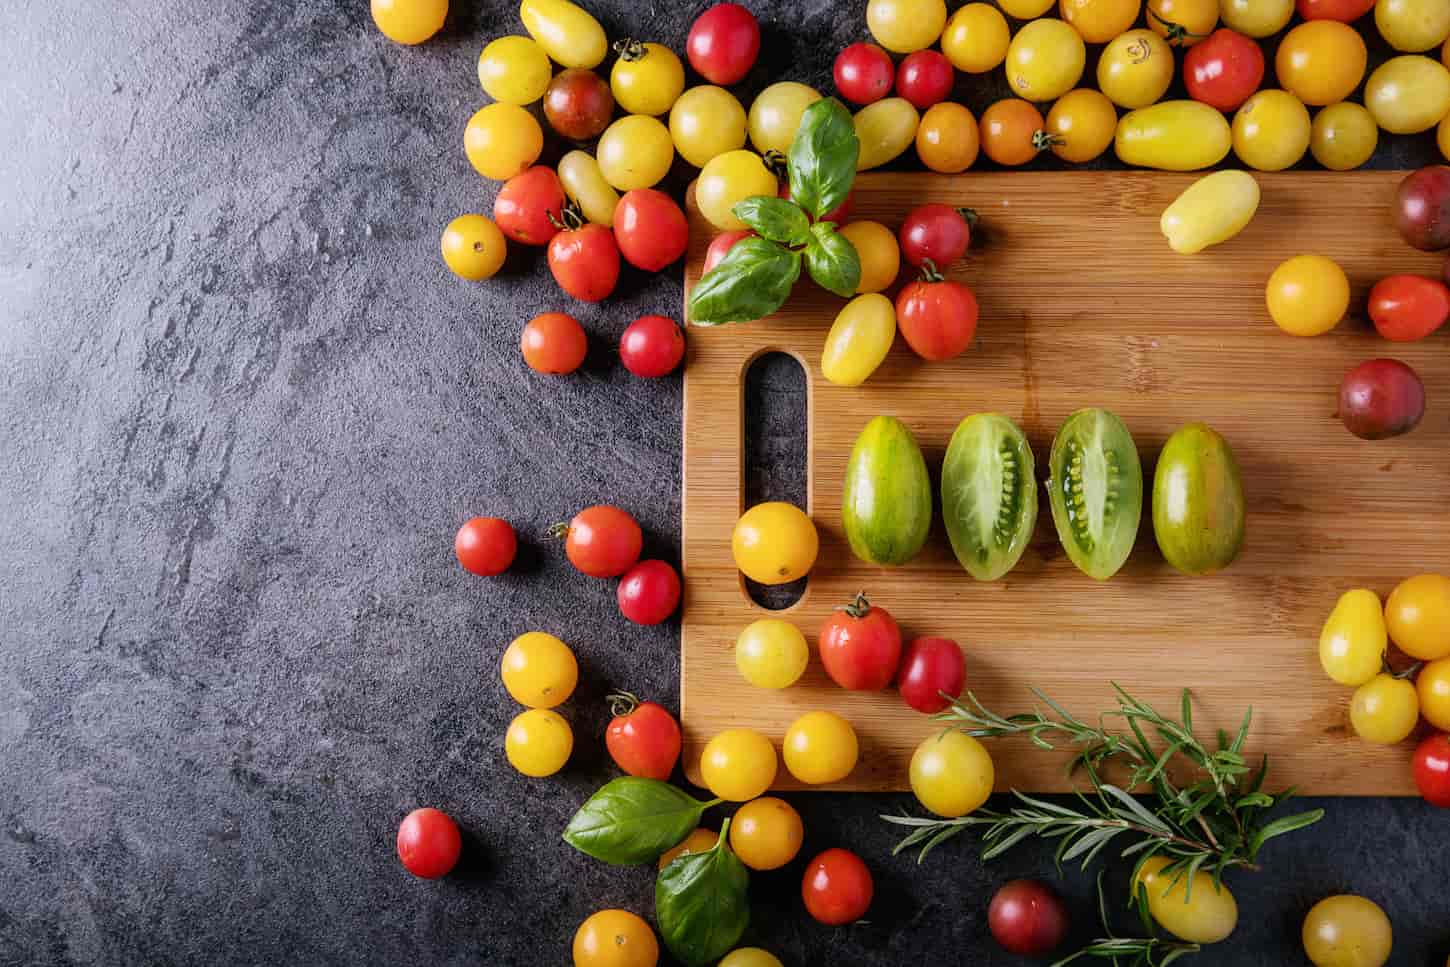 An image of cherry tomatoes: red, yellow, and green served on a wooden board over dark texture background.